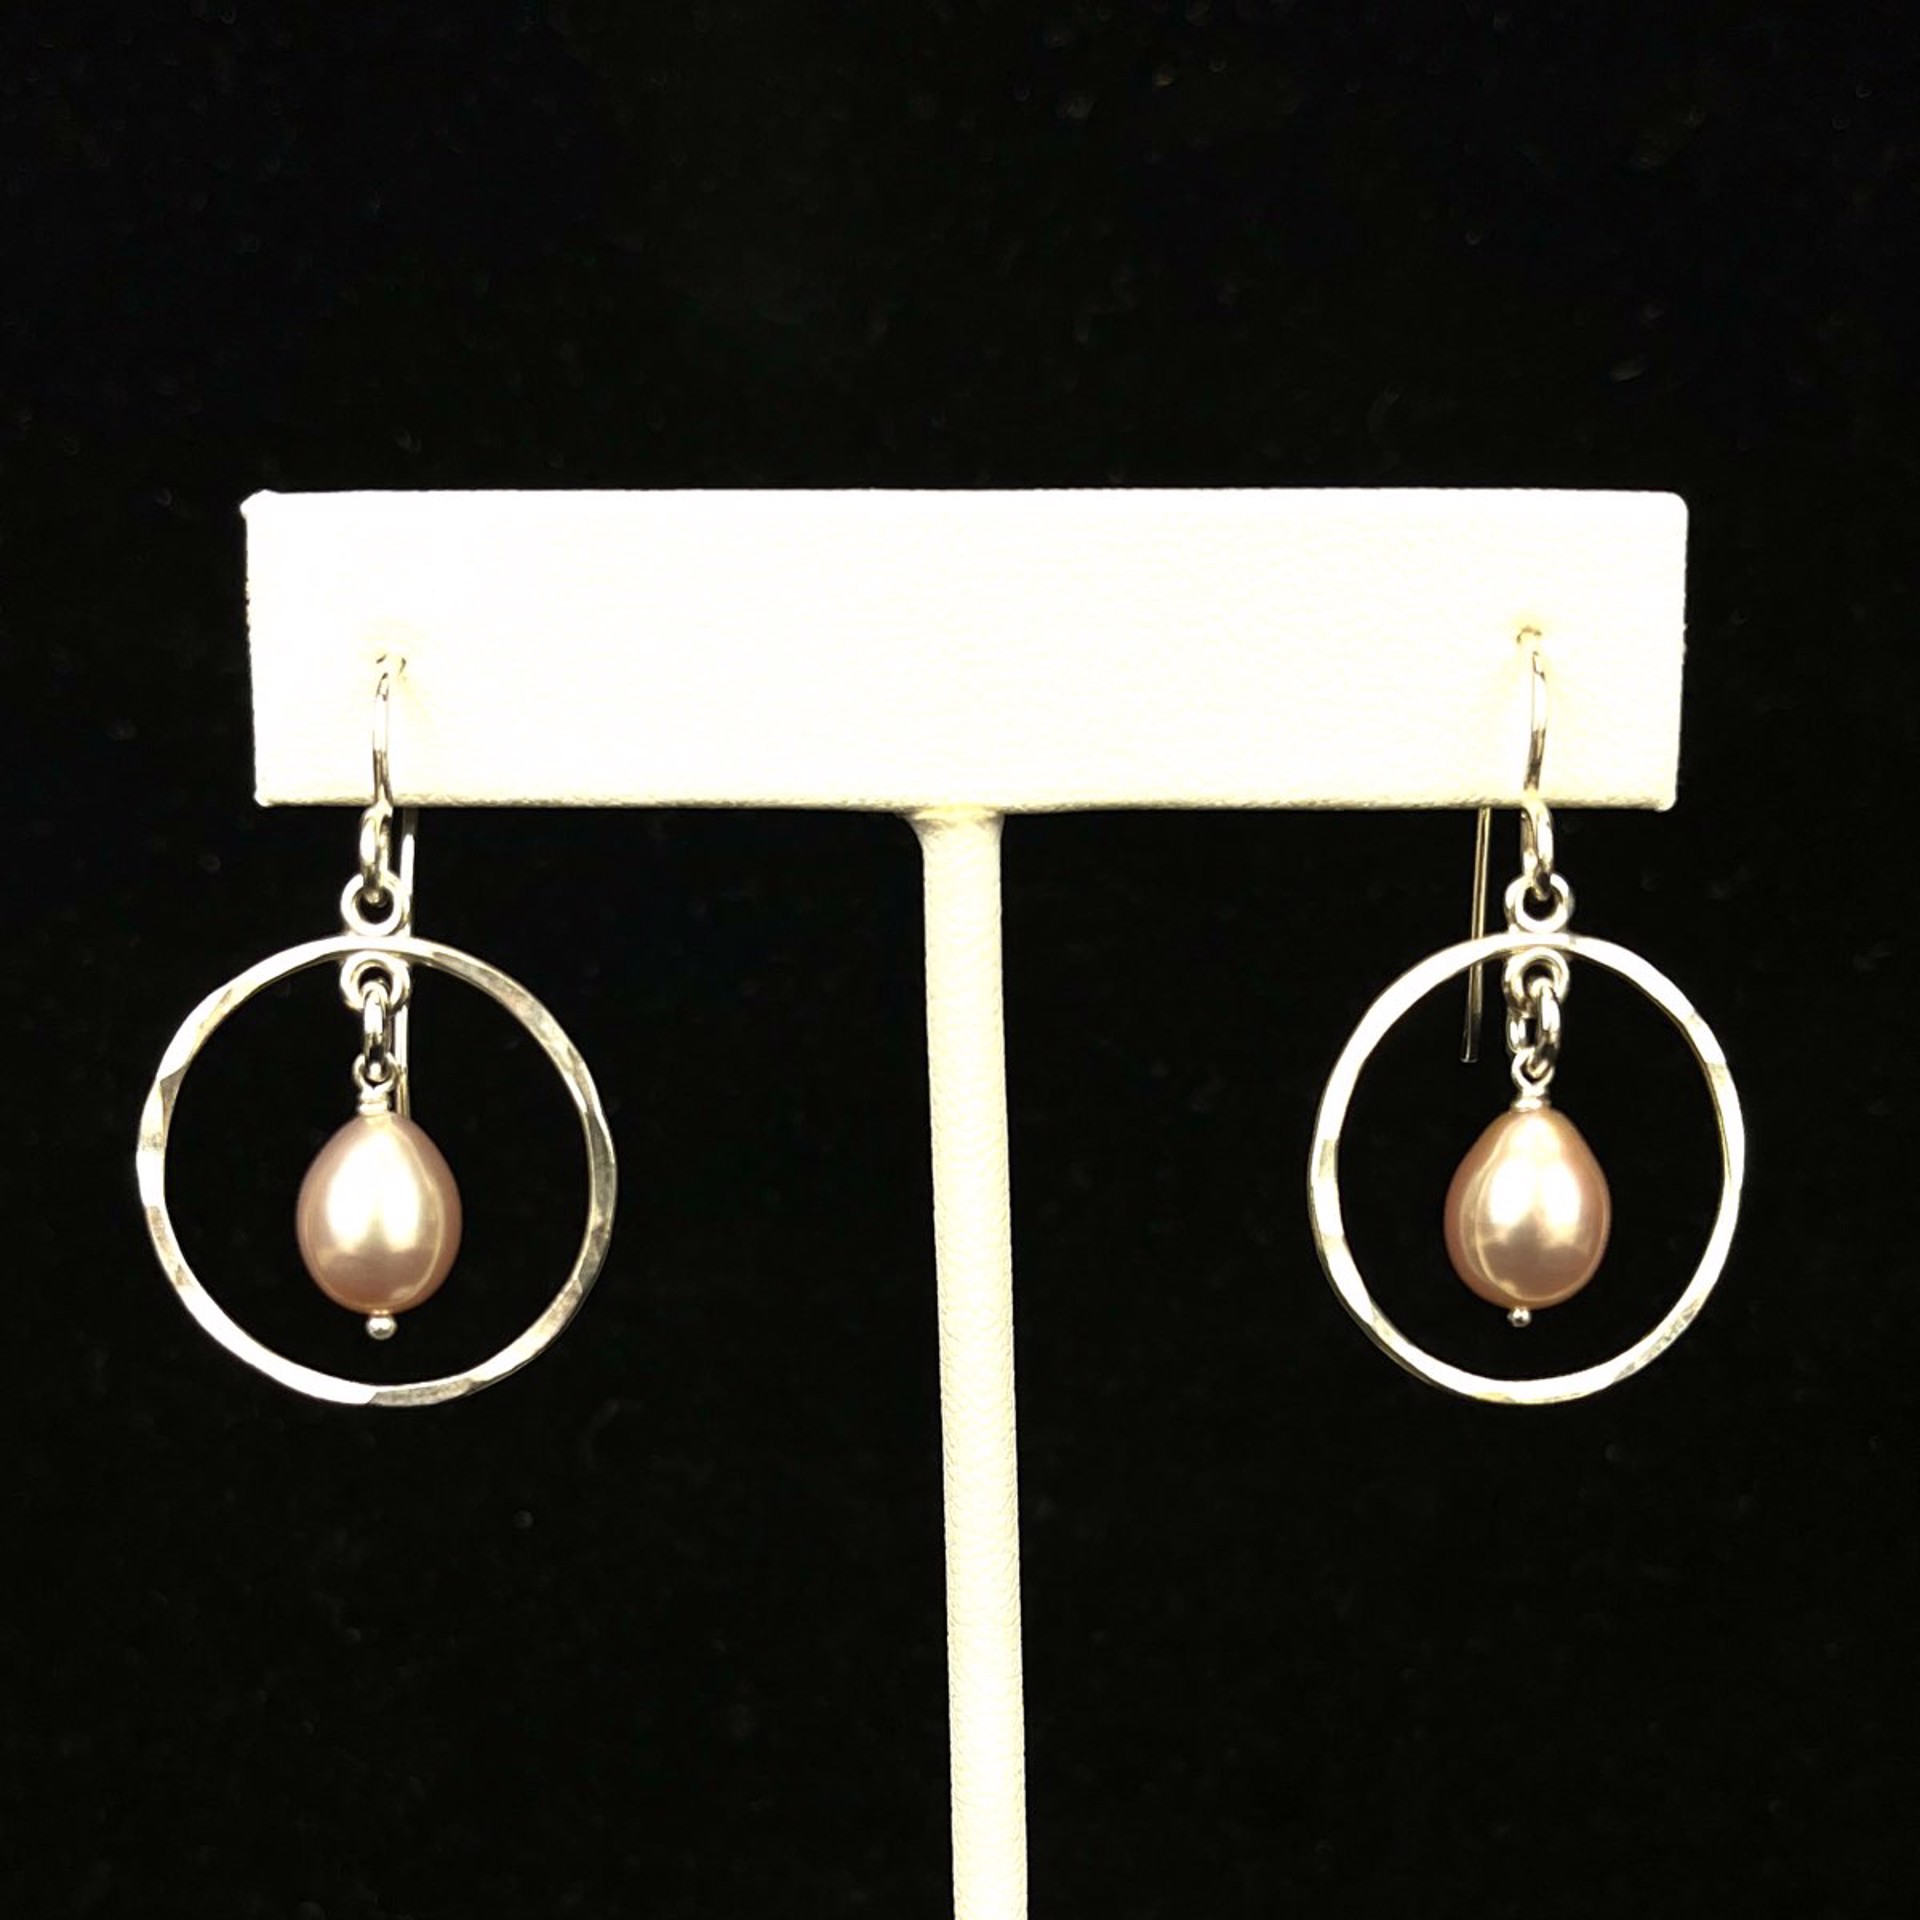 Hammered Circle with Pearl Sterling Earrings by Nichole Collins